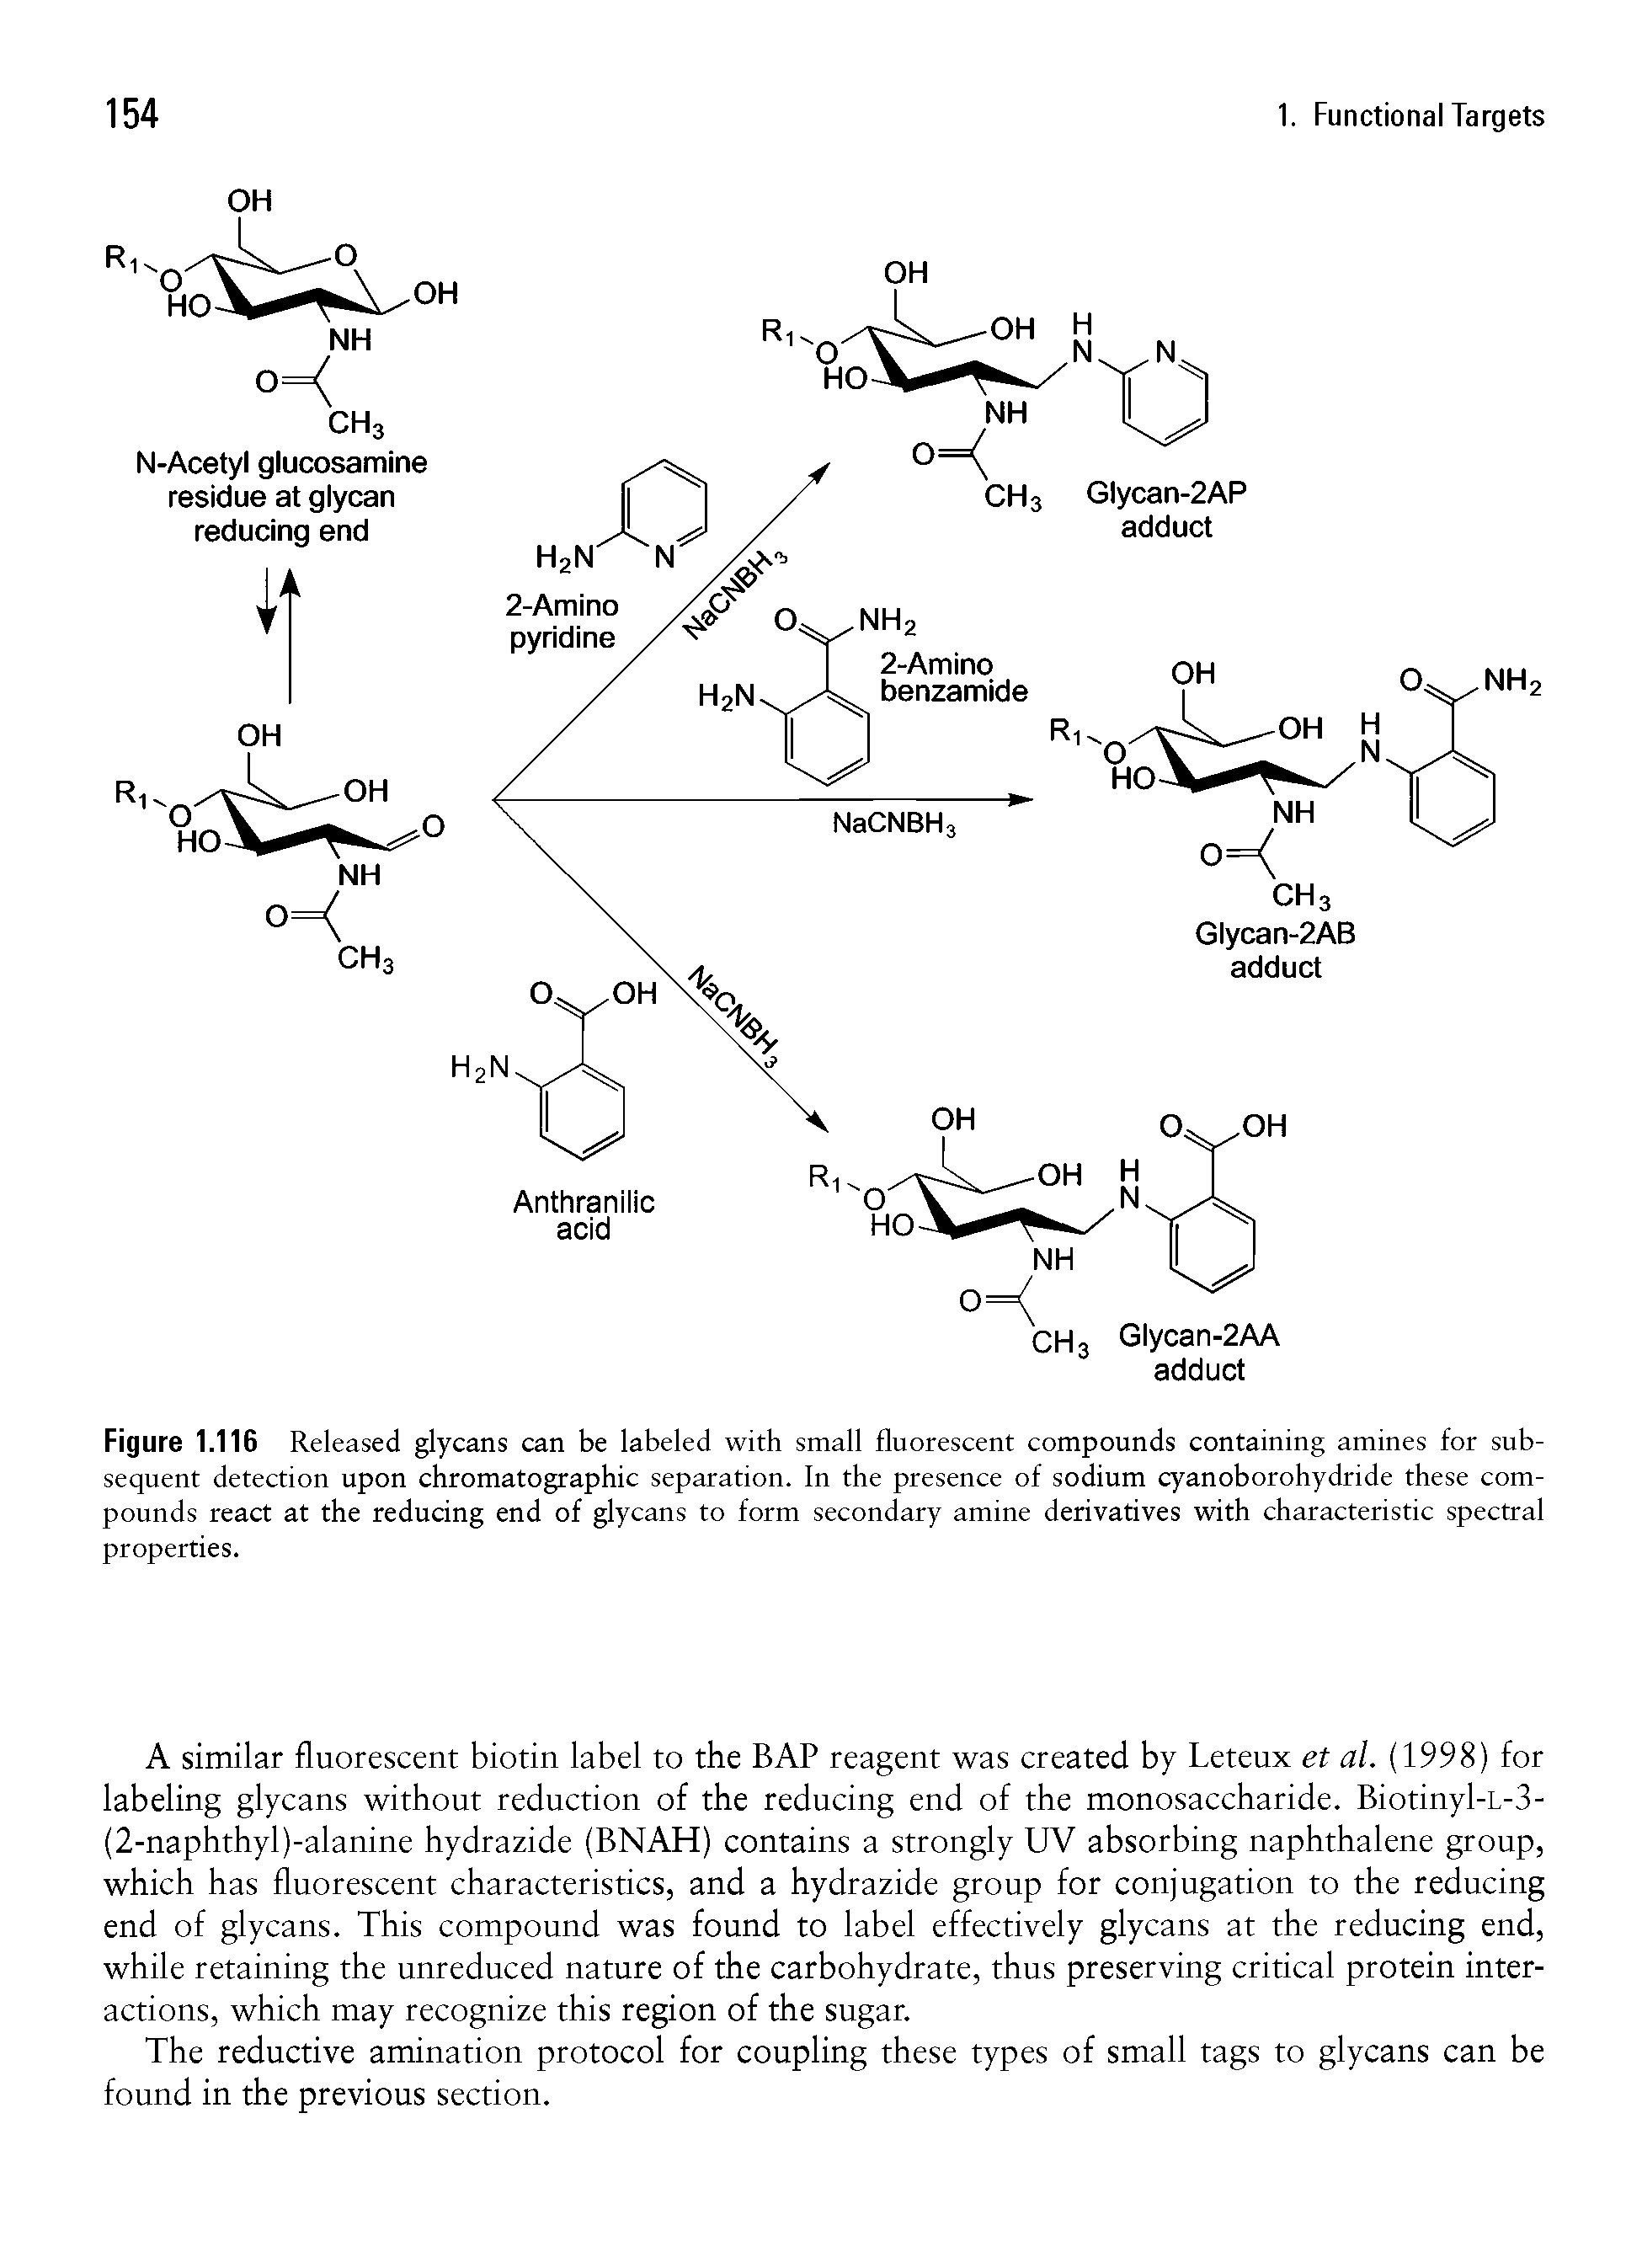 Figure 1.116 Released glycans can be labeled with small fluorescent compounds containing amines for subsequent detection upon chromatographic separation. In the presence of sodium cyanoborohydride these compounds react at the reducing end of glycans to form secondary amine derivatives with characteristic spectral properties.